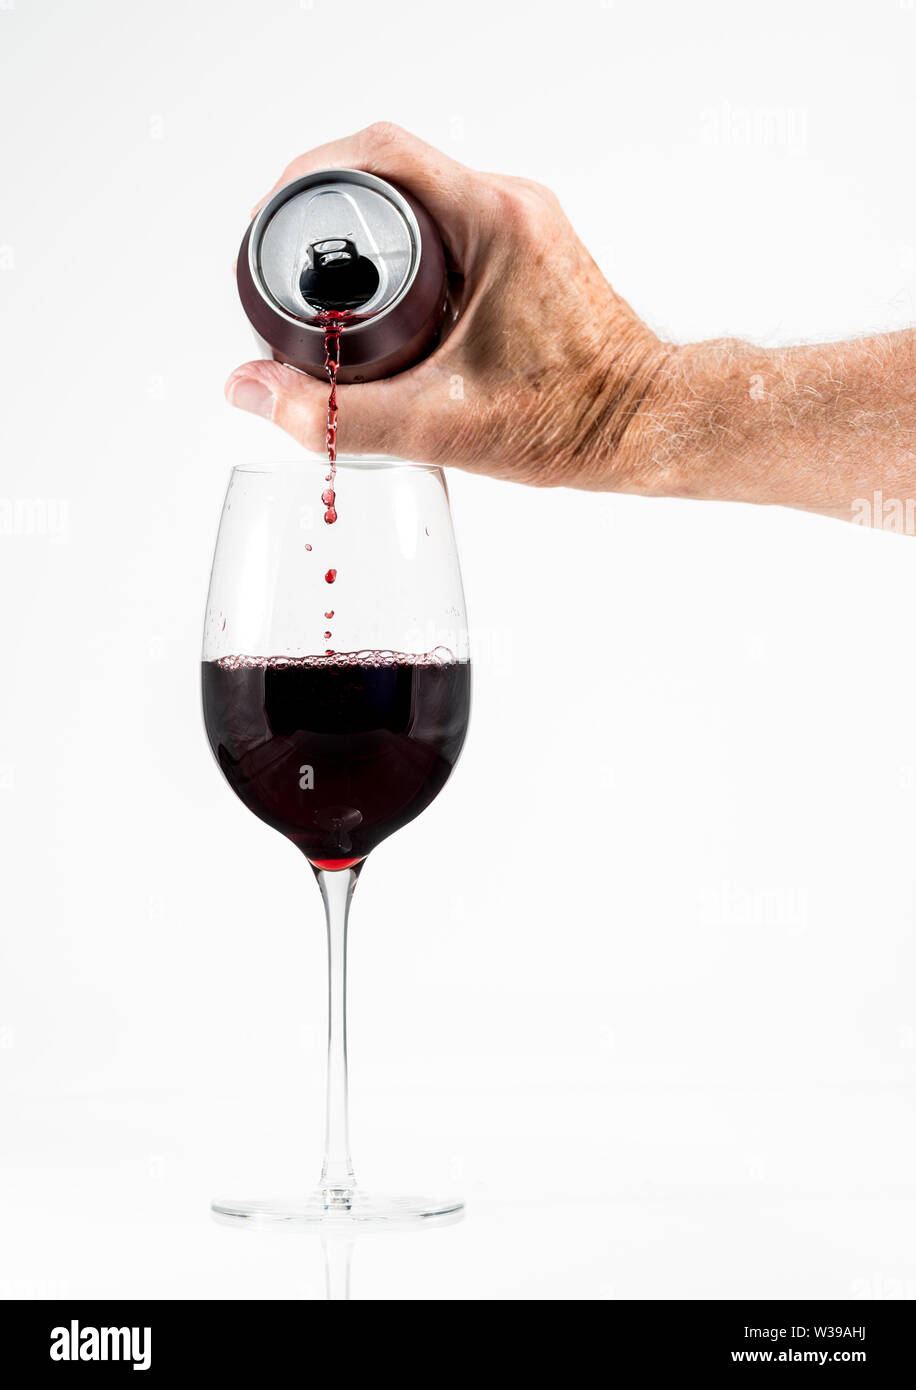 https://c8.alamy.com/comp/W39AHJ/senior-adult-pouring-a-glass-of-red-wine-from-an-aluminum-can-W39AHJ.jpg